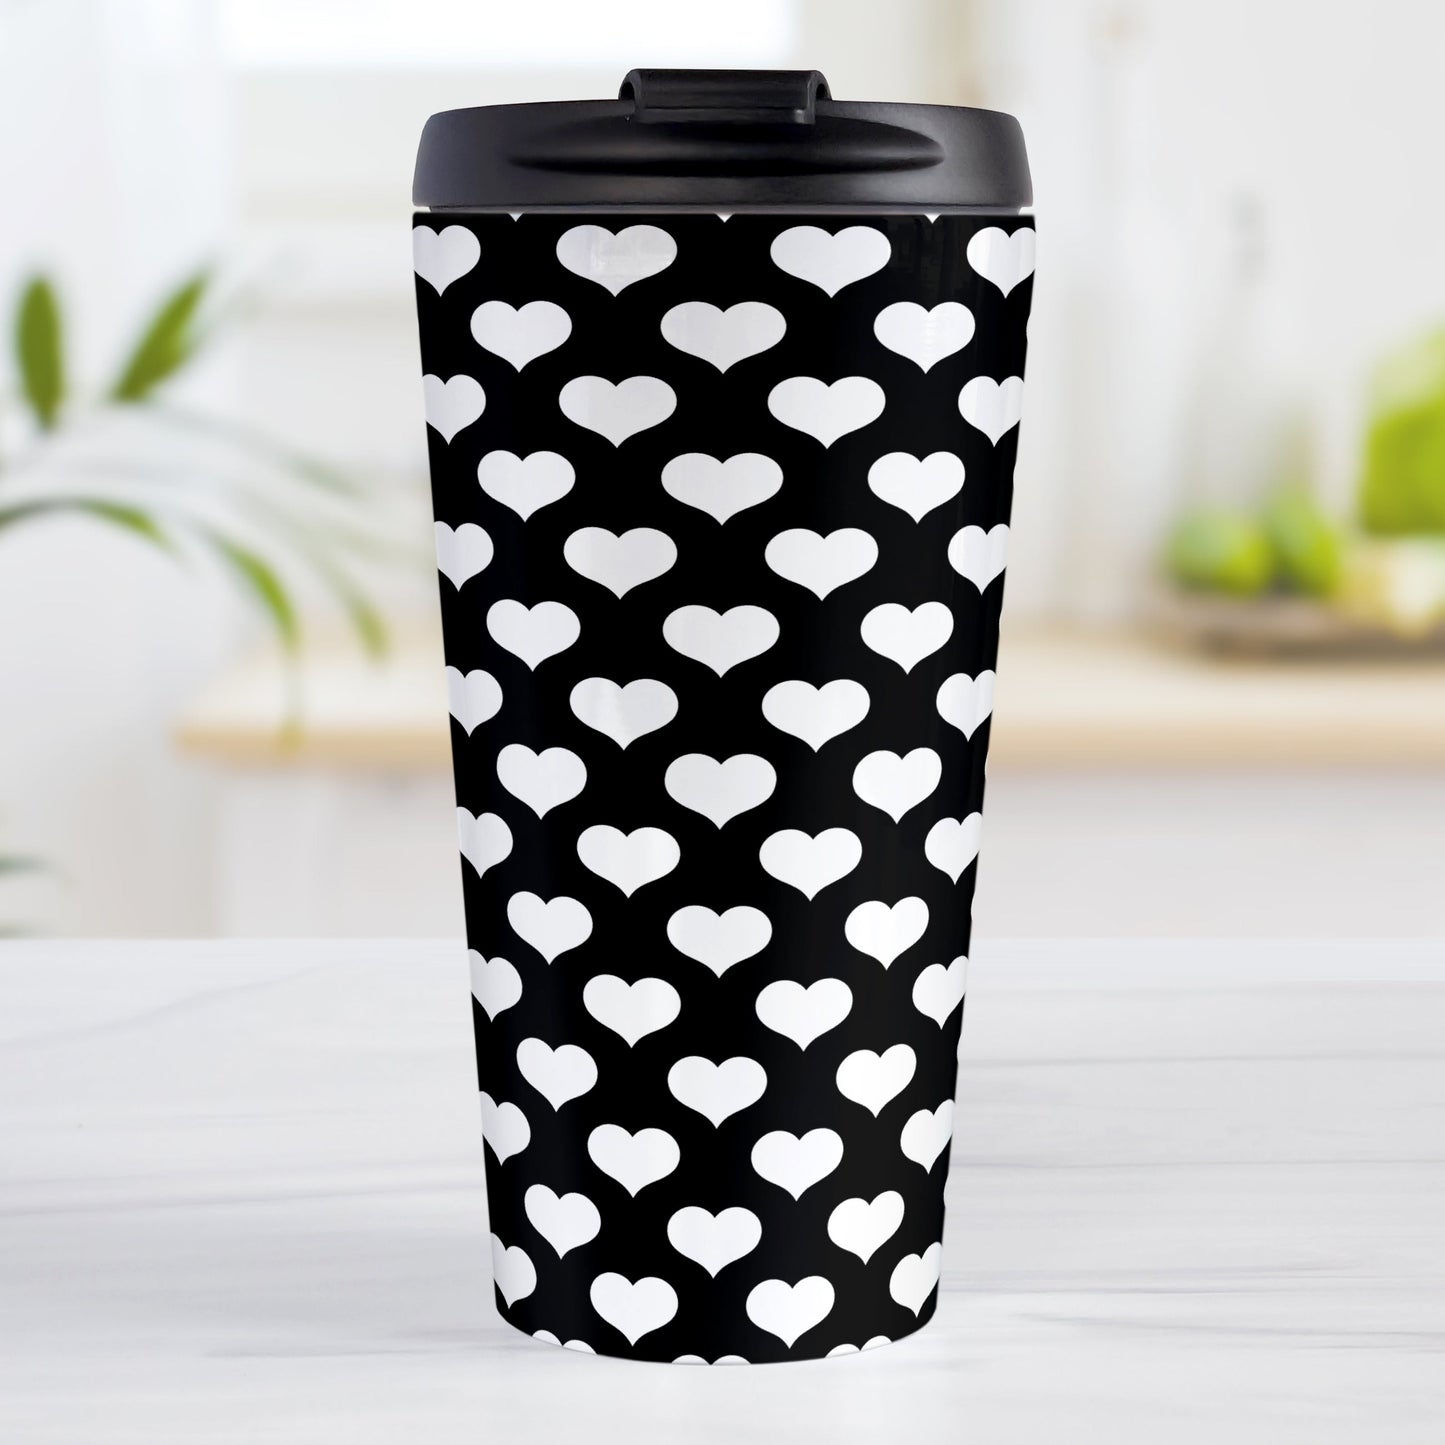 White Hearts Pattern Black Travel Mug (15oz, stainless steel insulated) at Amy's Coffee Mugs